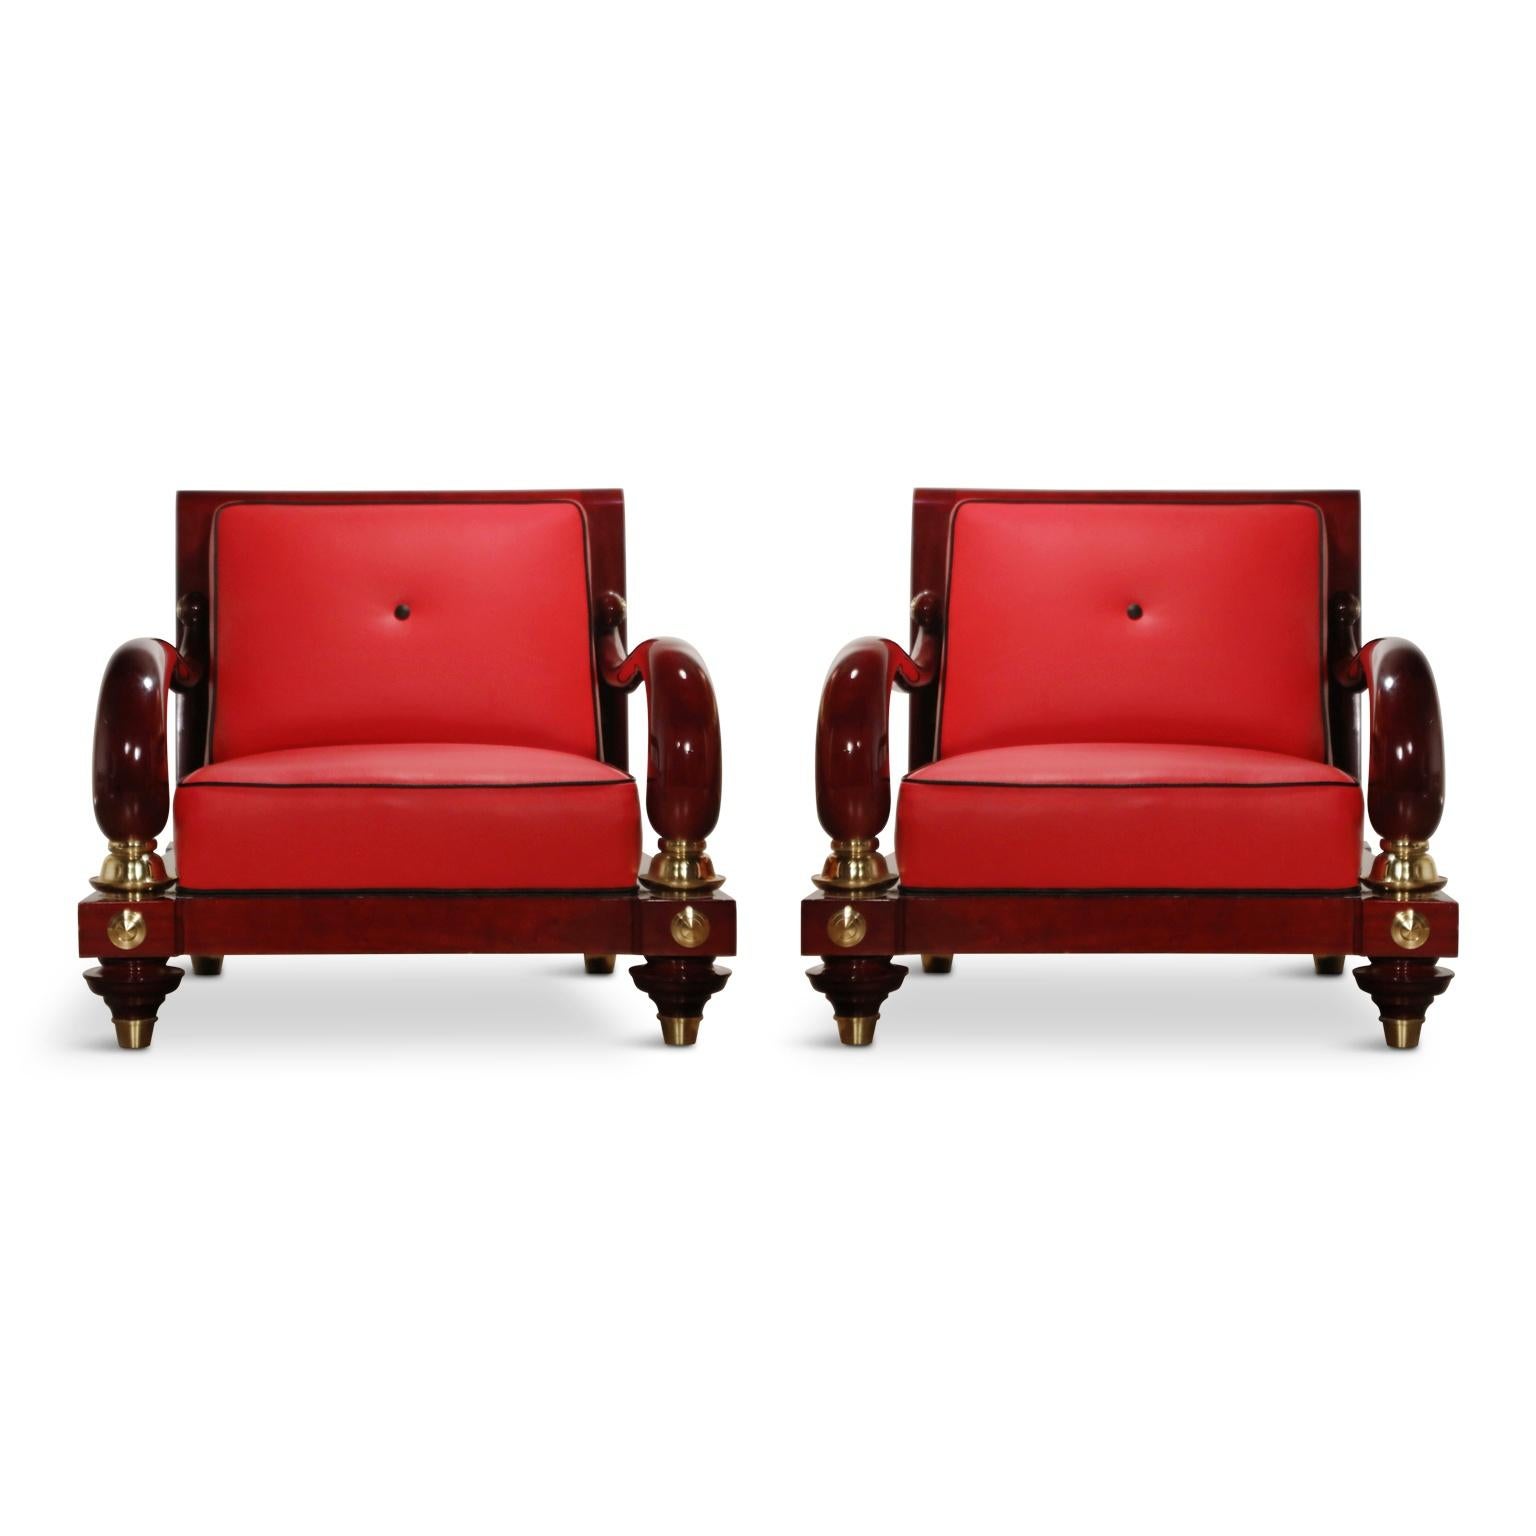 These amazing club chairs by Octavio Vidales for Muebles Johrvy are incredibly desirable for many reasons. First, they are extremely rare, with not many having been produced, so they make fantastic collectors pieces. Second, they are sizable and